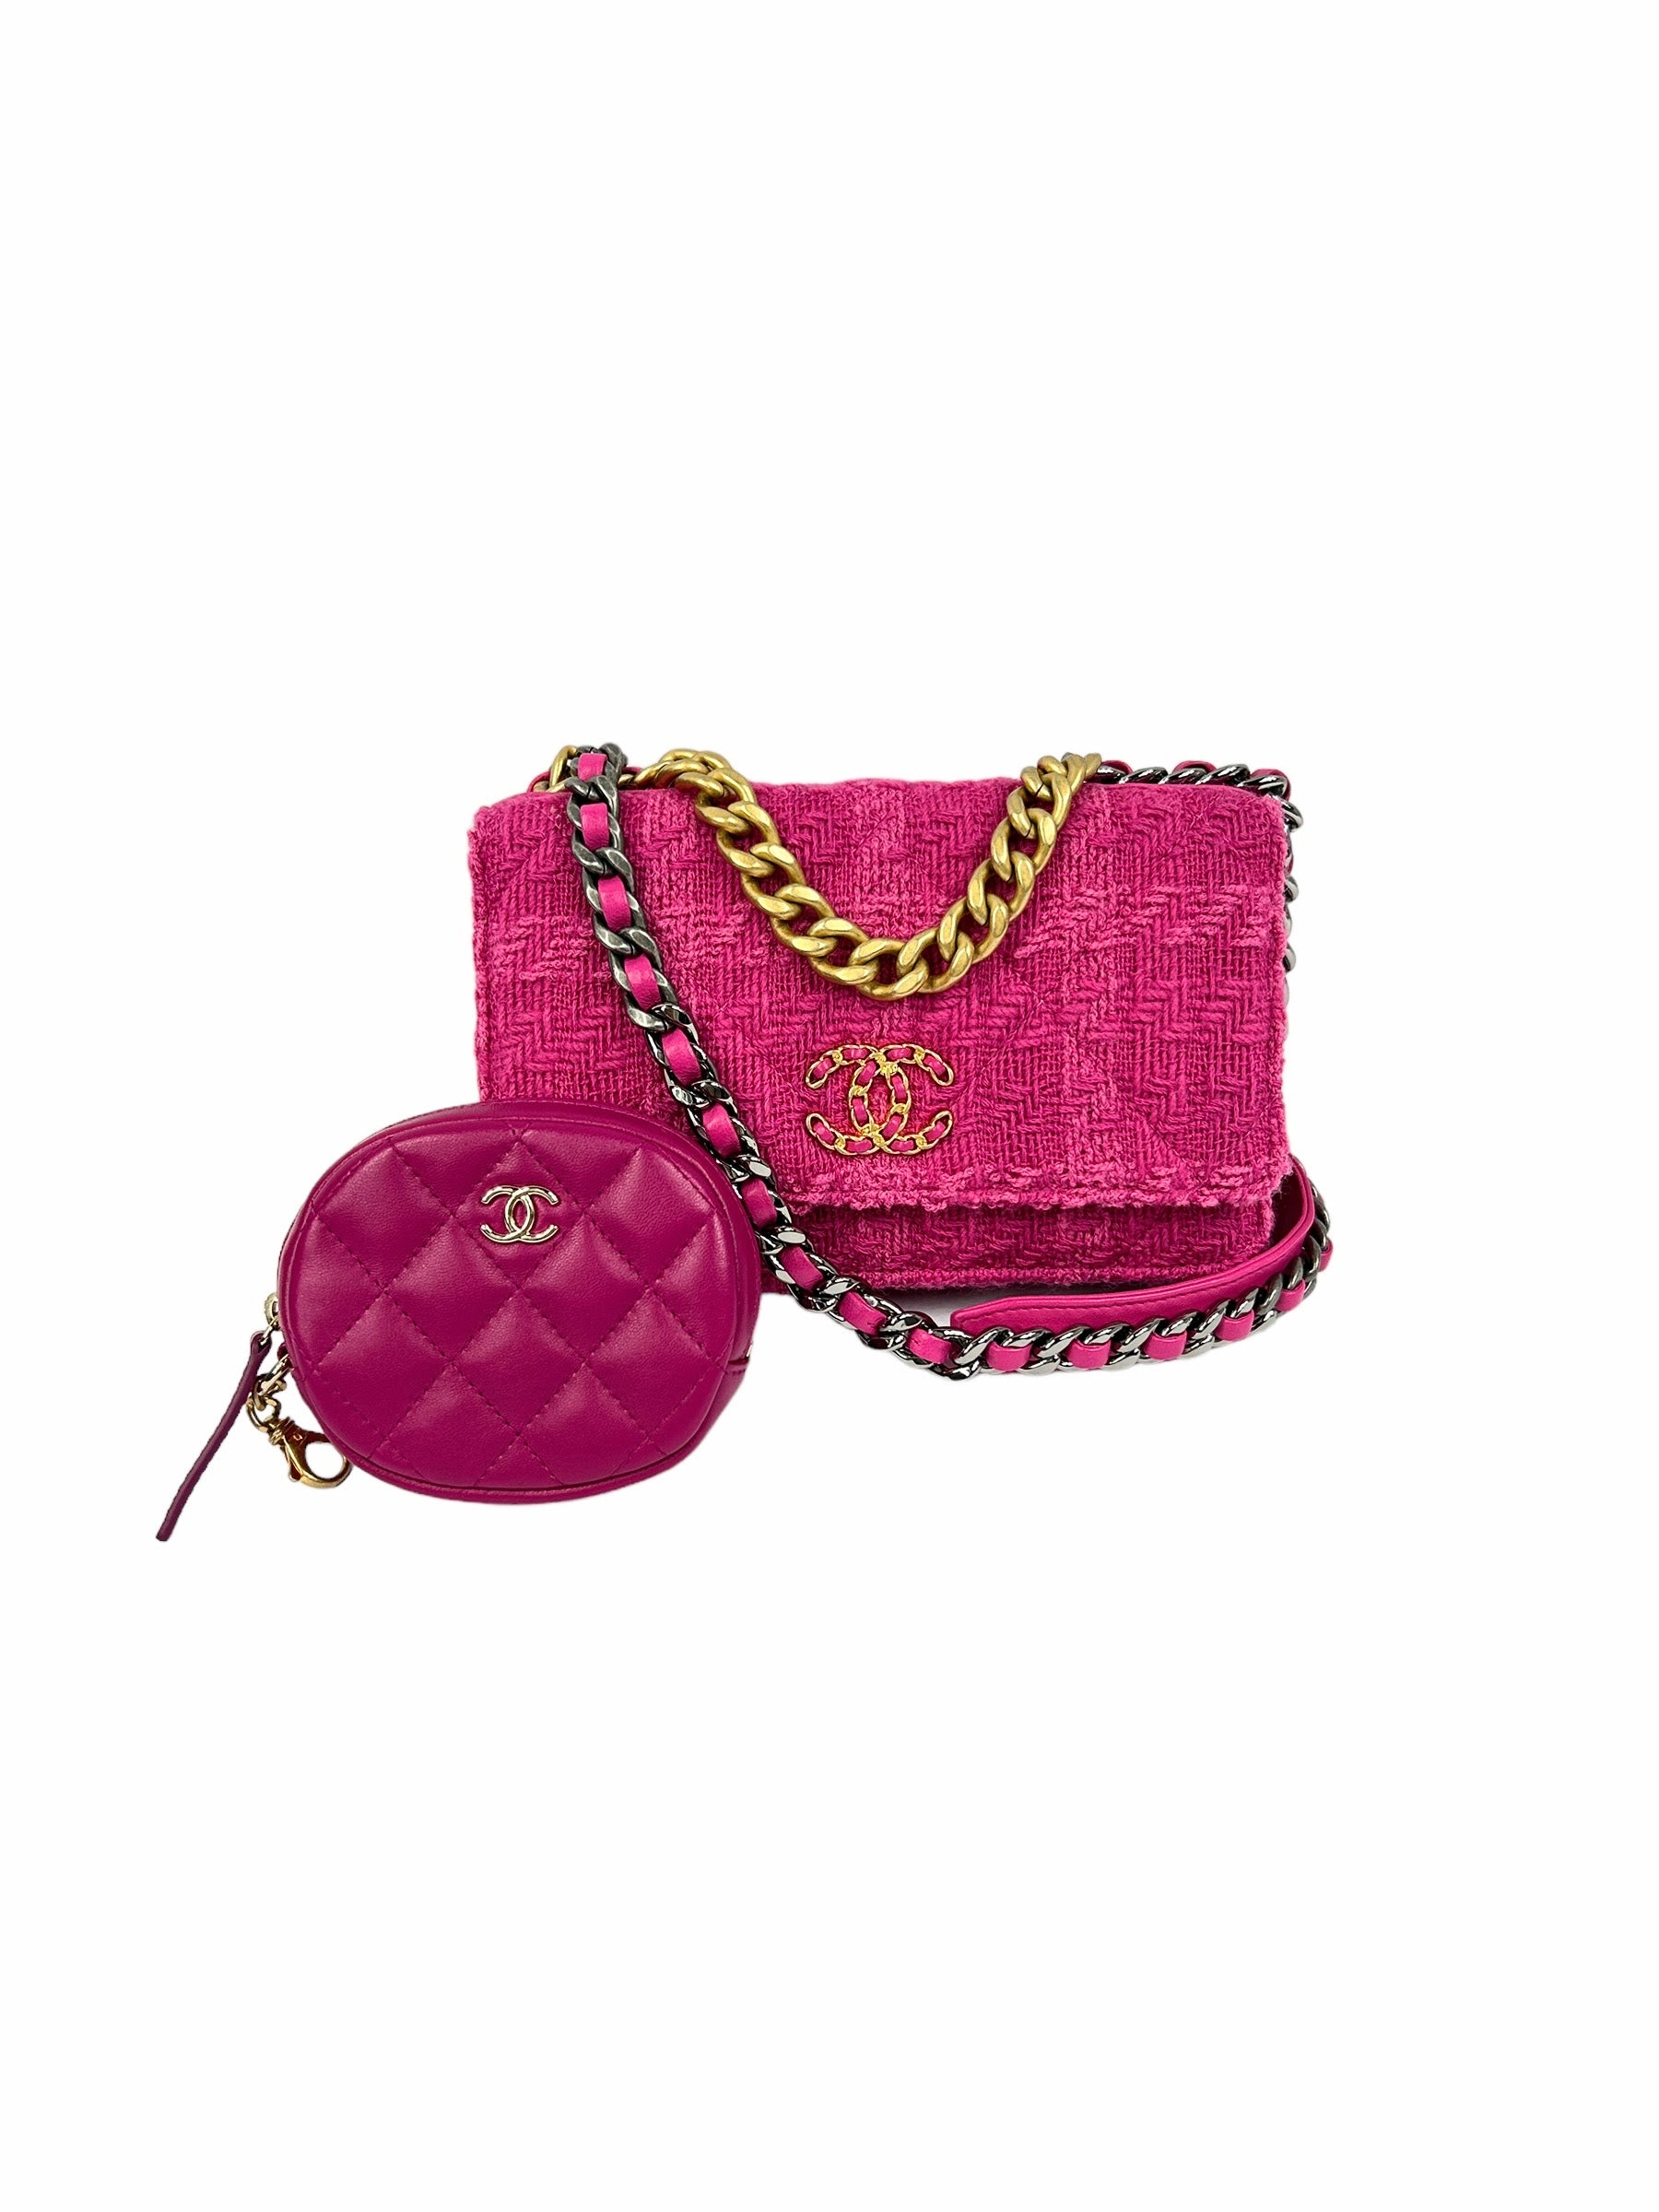 Hot Pink Tweed 19 Wallet On Chain w/AGHW/GHW/SHW/RHW- SOLD ON LAYAWAY